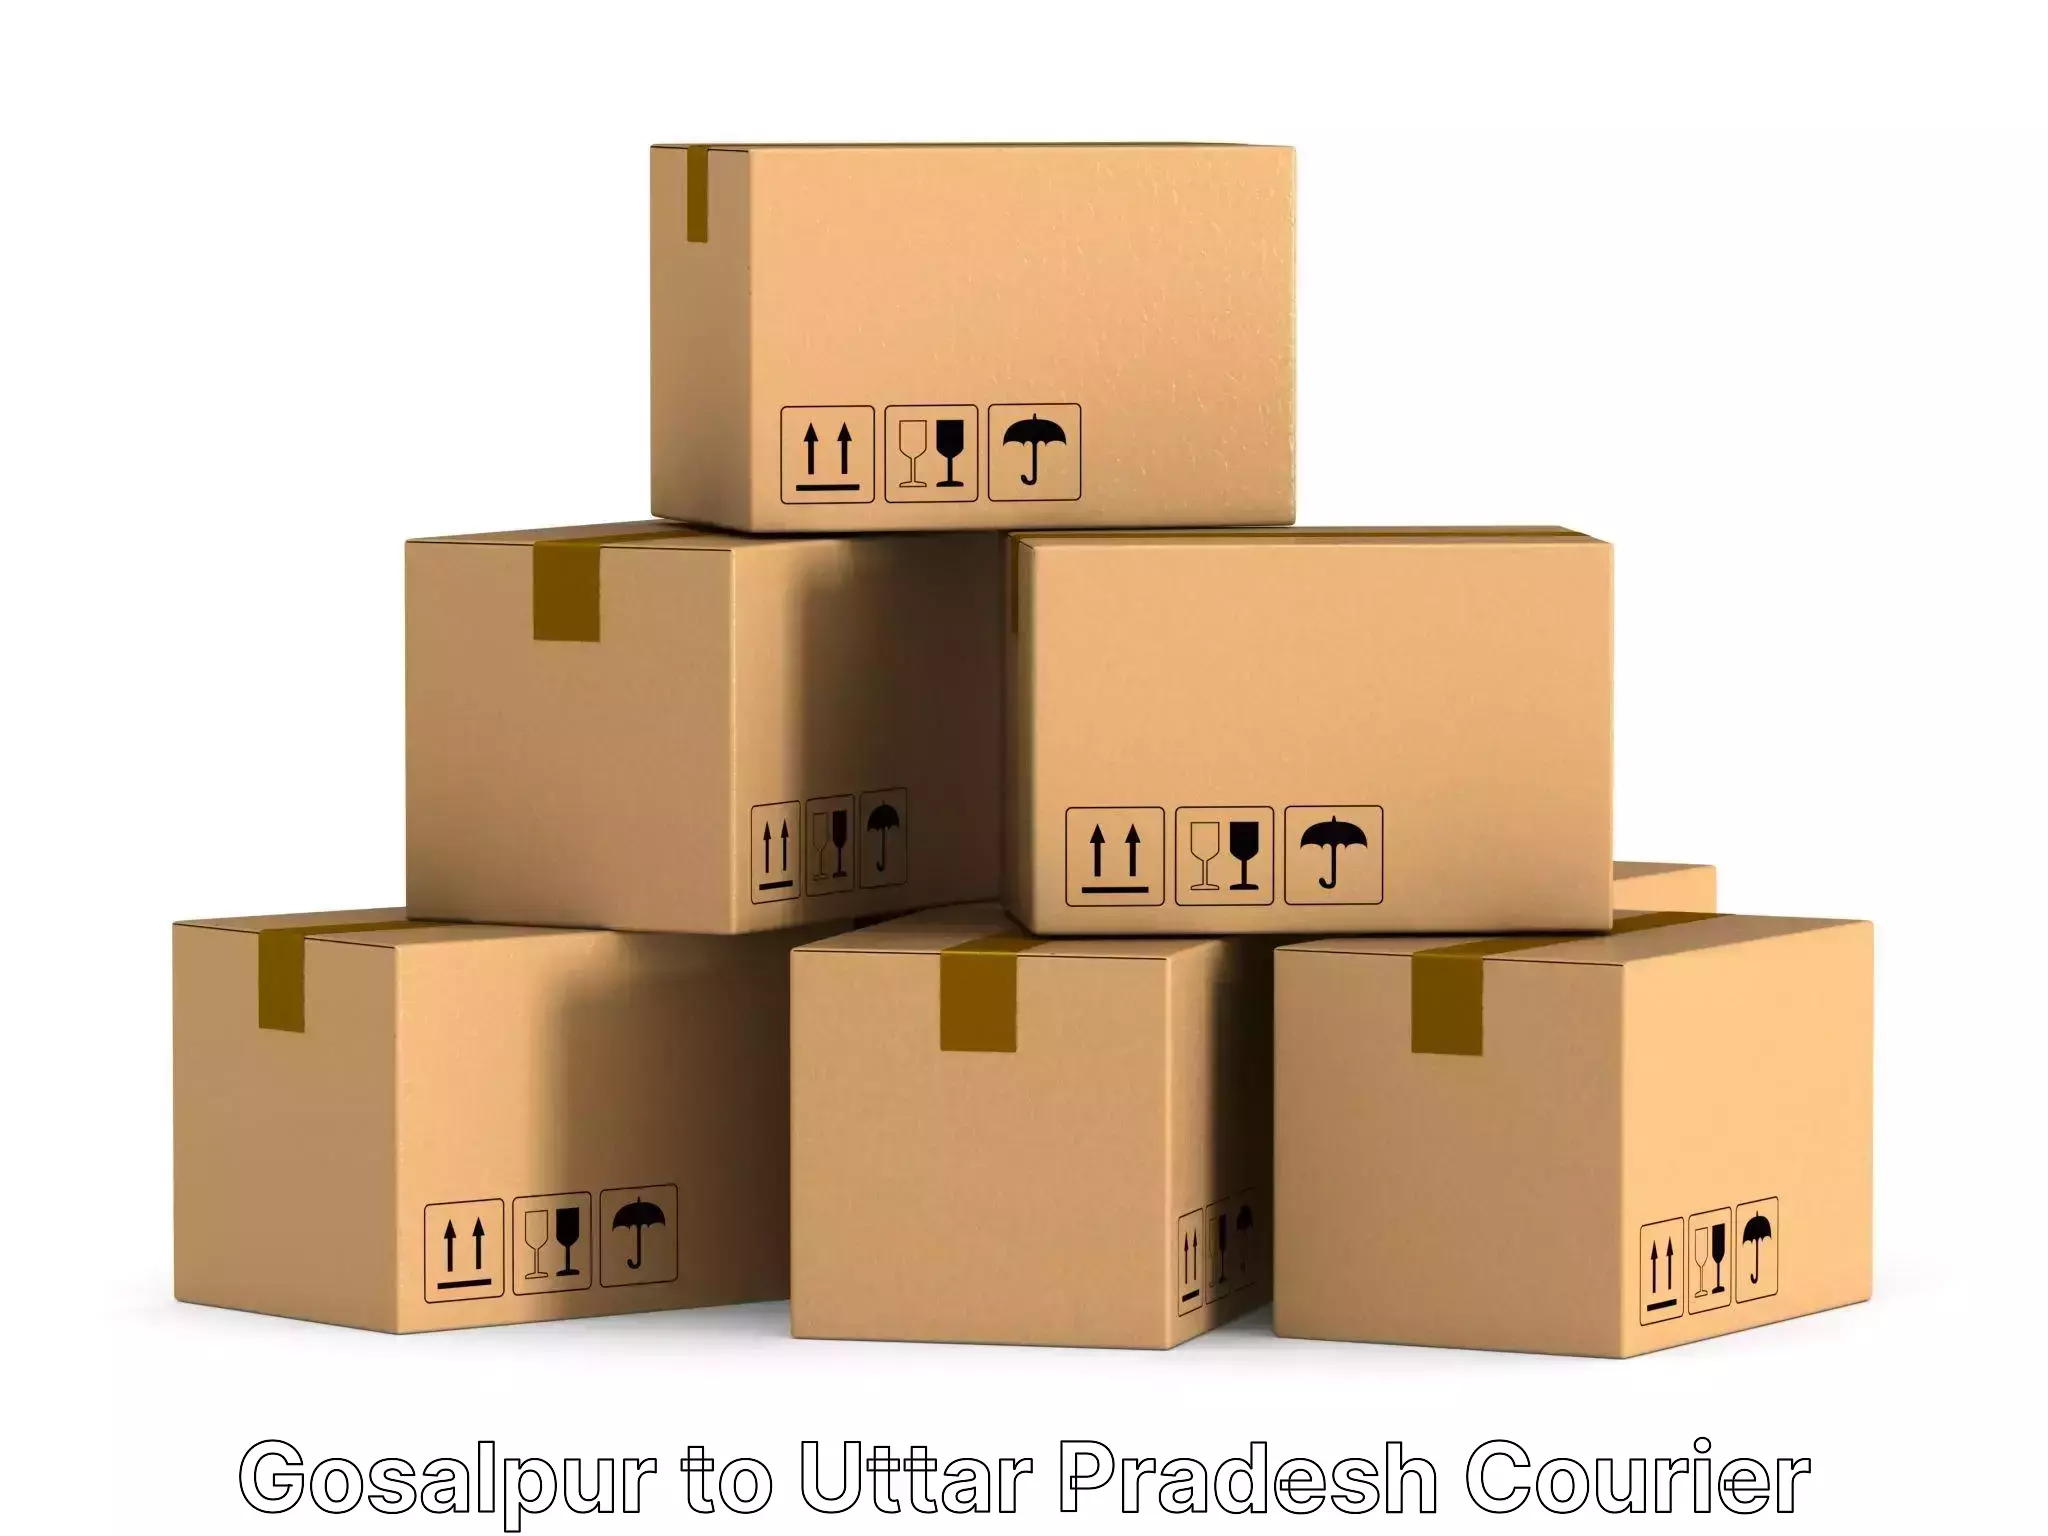 Home shifting experts Gosalpur to Tulsipur